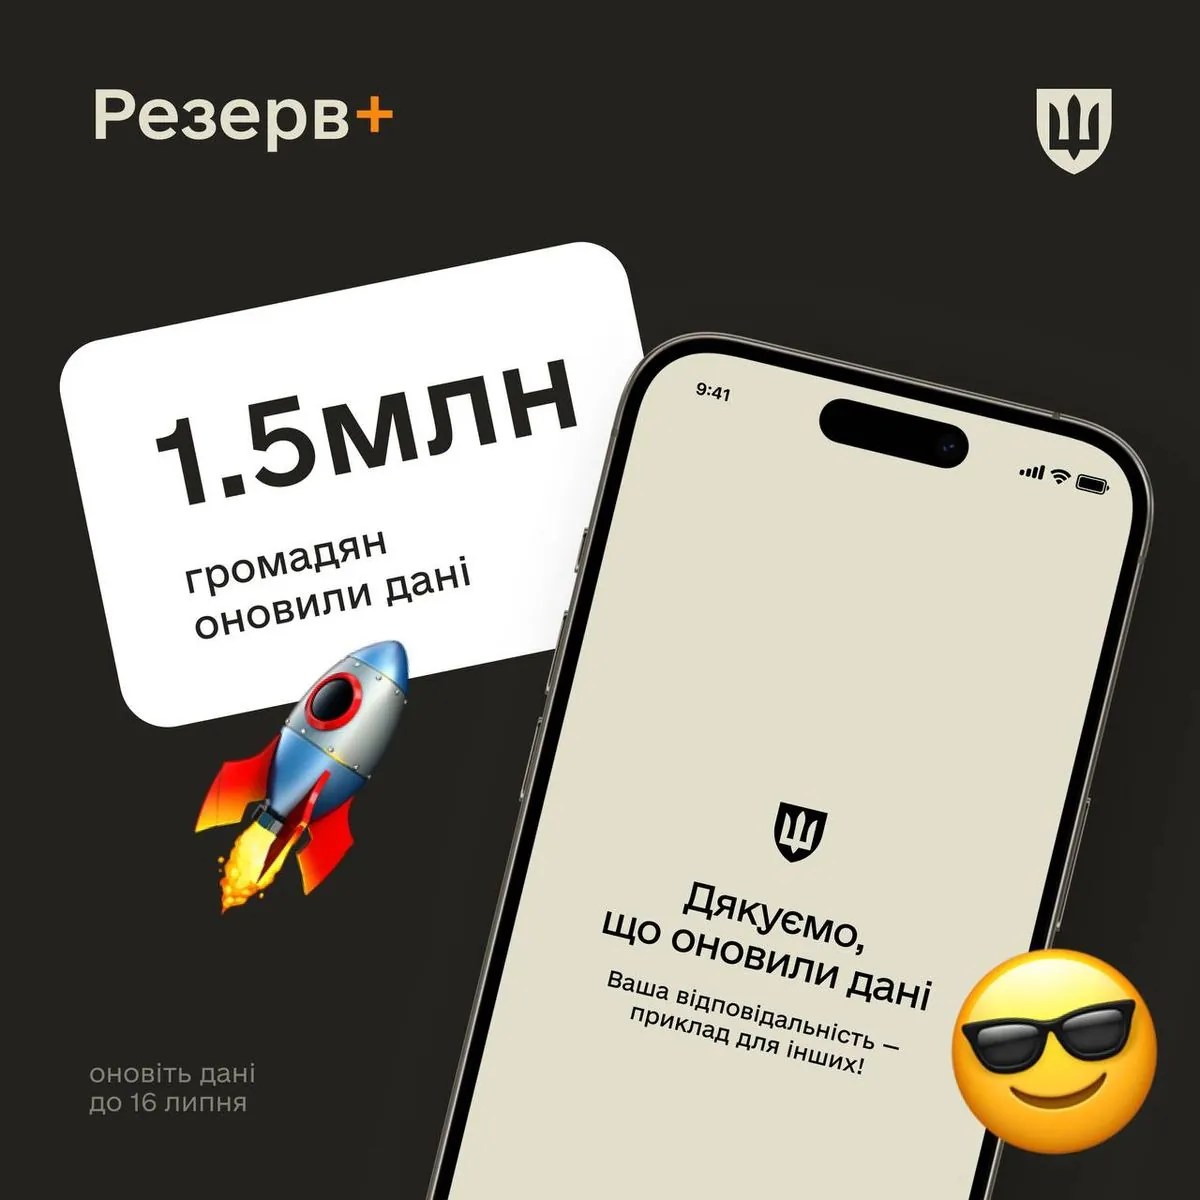 In Ukraine, 1.5 million citizens have already updated their data through the Reserve+ application